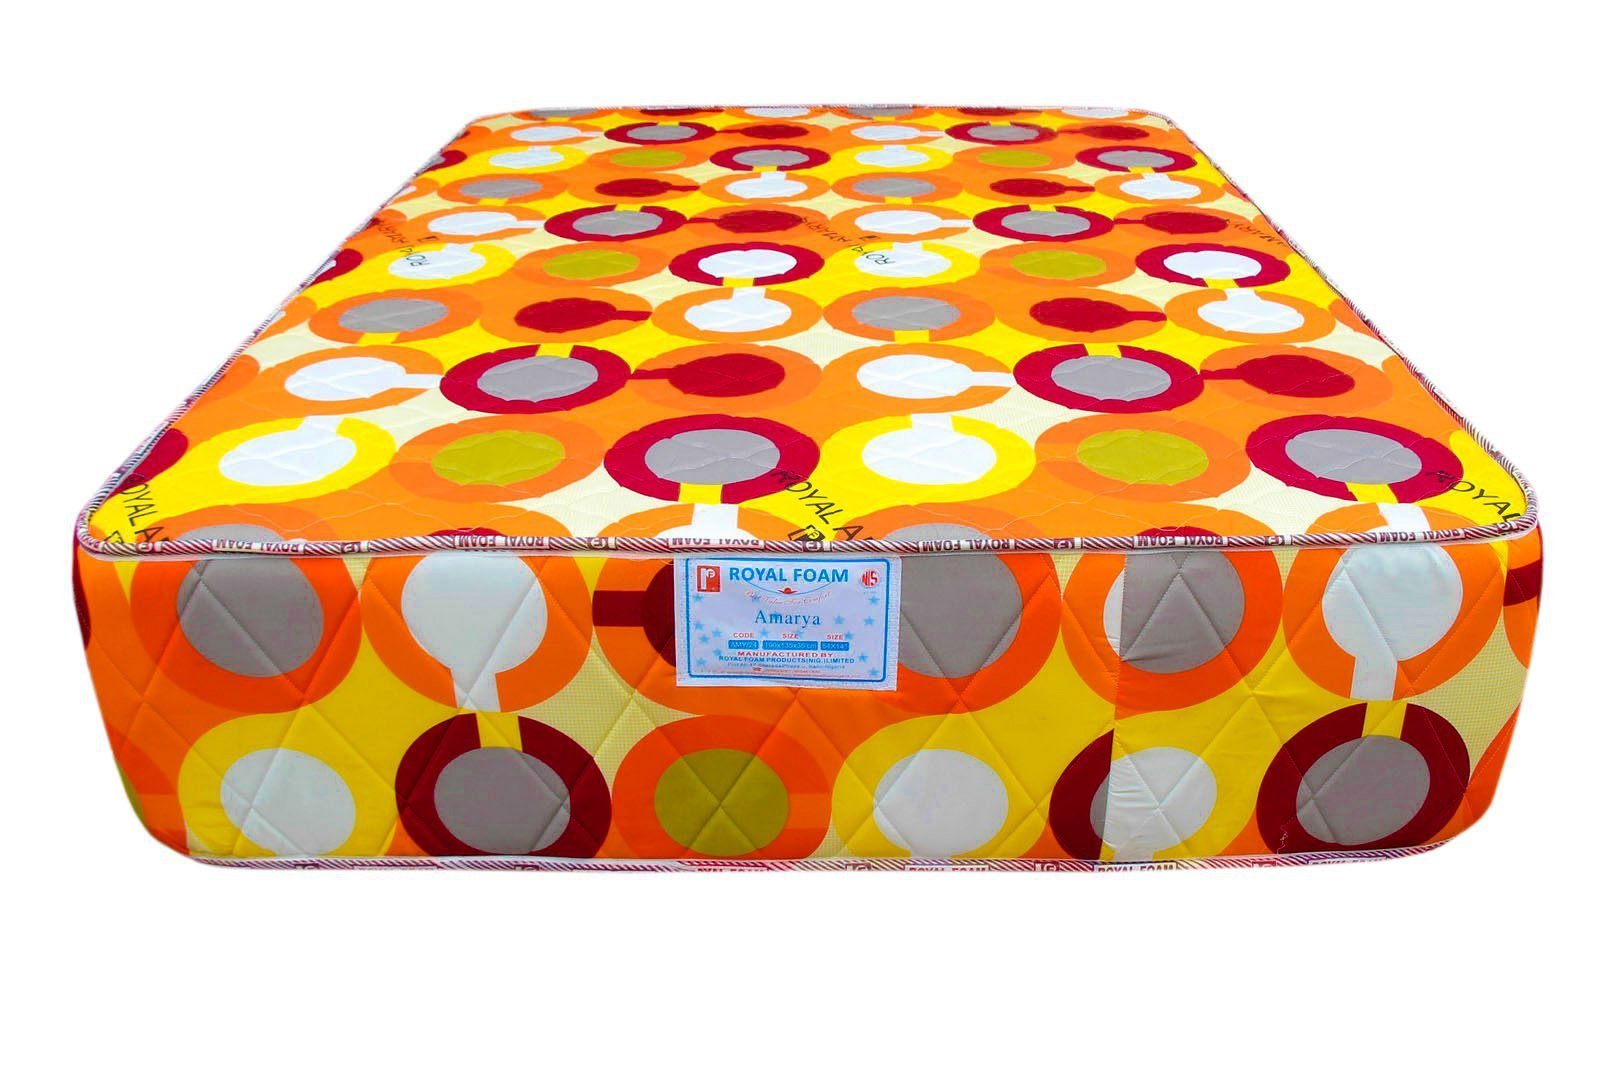 Royal Amarya-Poly Cotton Fabric - 14 Density foam - Fully Quilted Mattress -190X120X20CM [75 x 48 x 8"] [6ft x 4ft x 8inches]